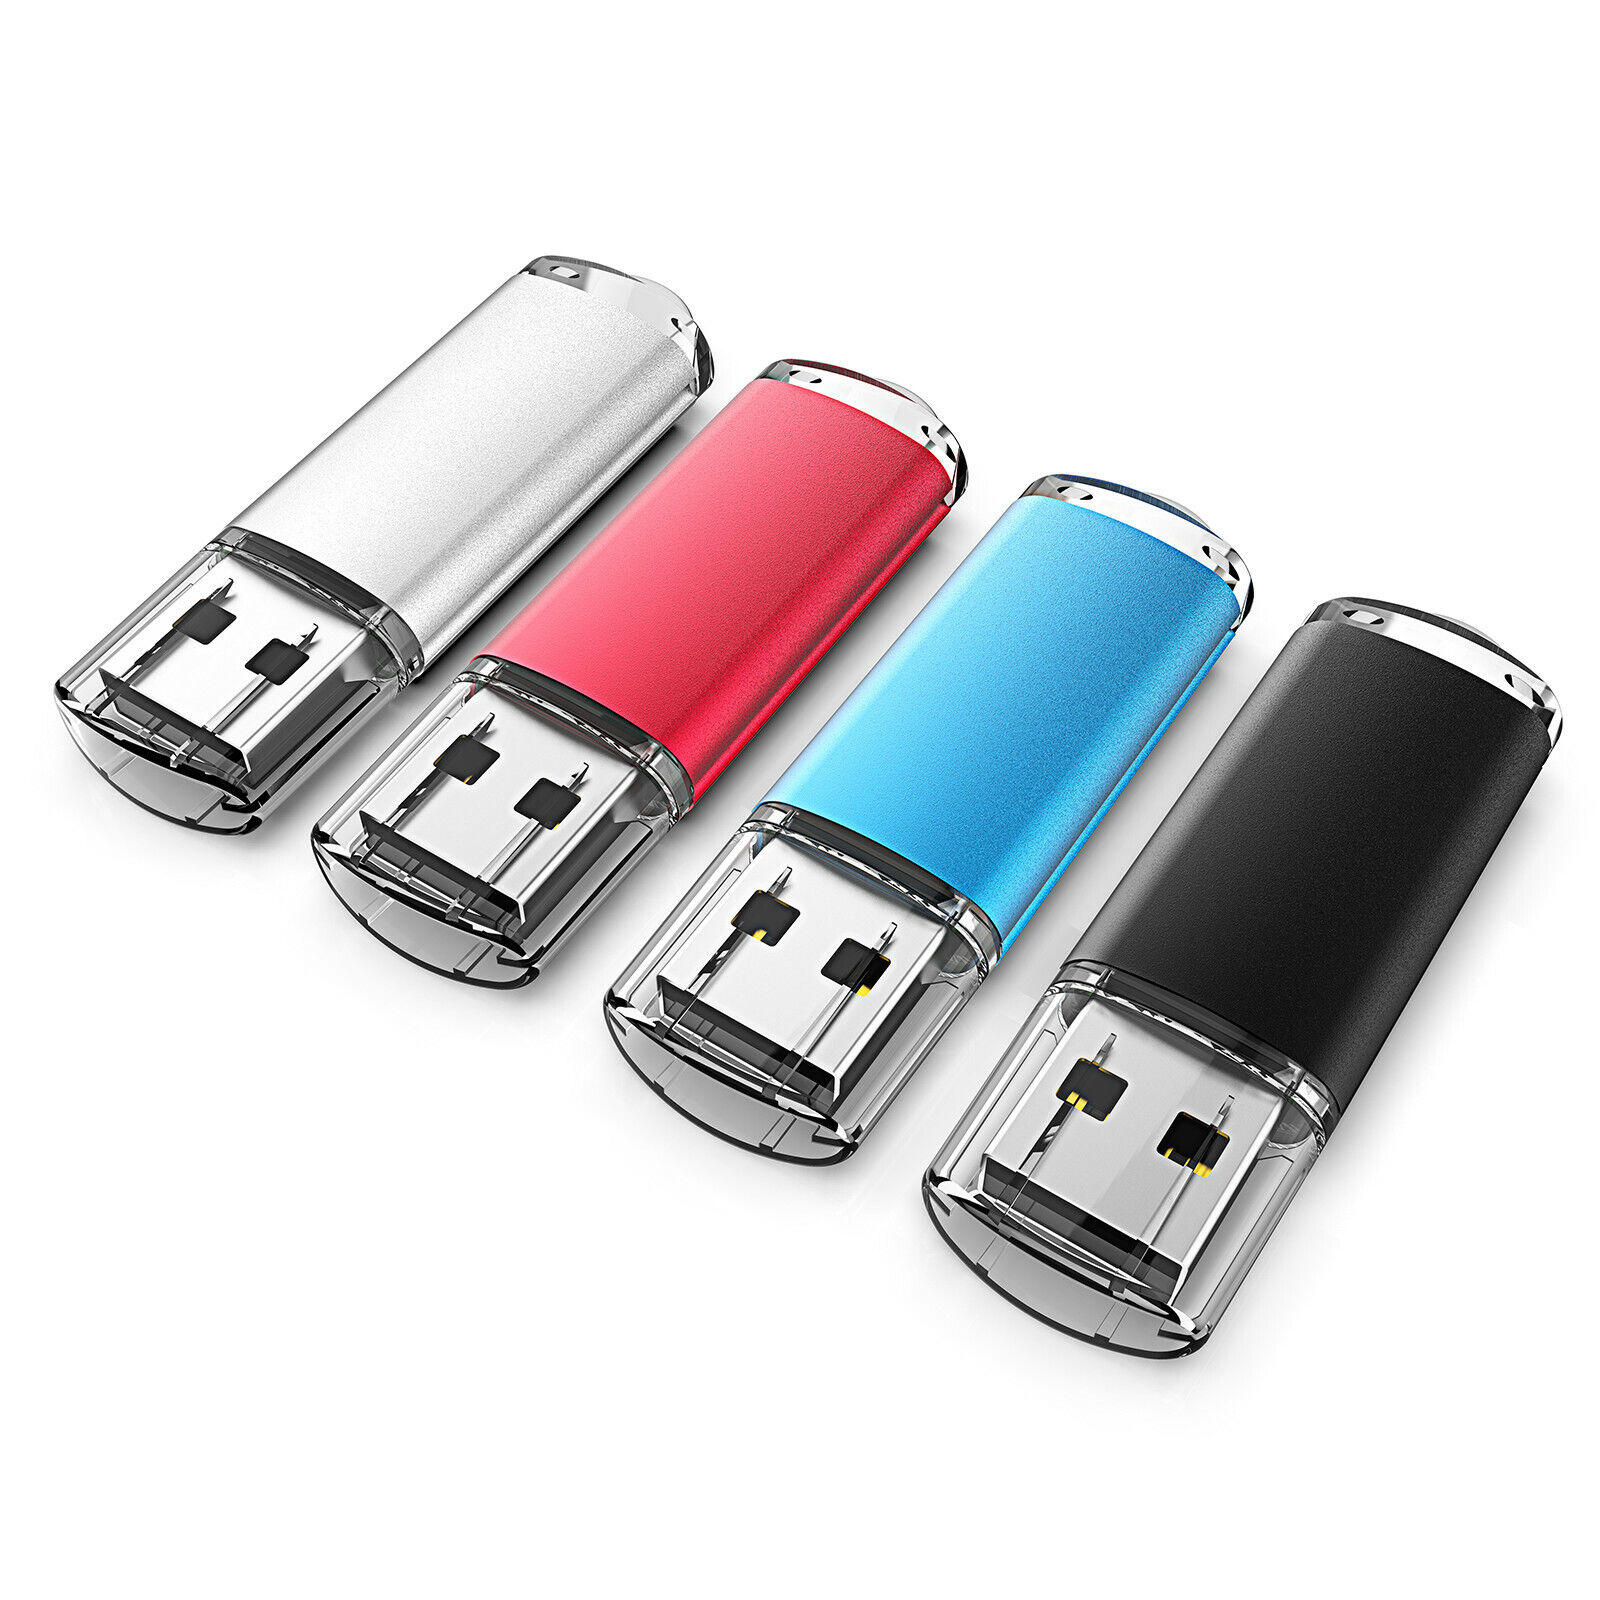 4 Pack 16GB USB 2.0 Flash Drive Memory Stick Thumb Drive Pen Drive Storage Kootion Does not apply